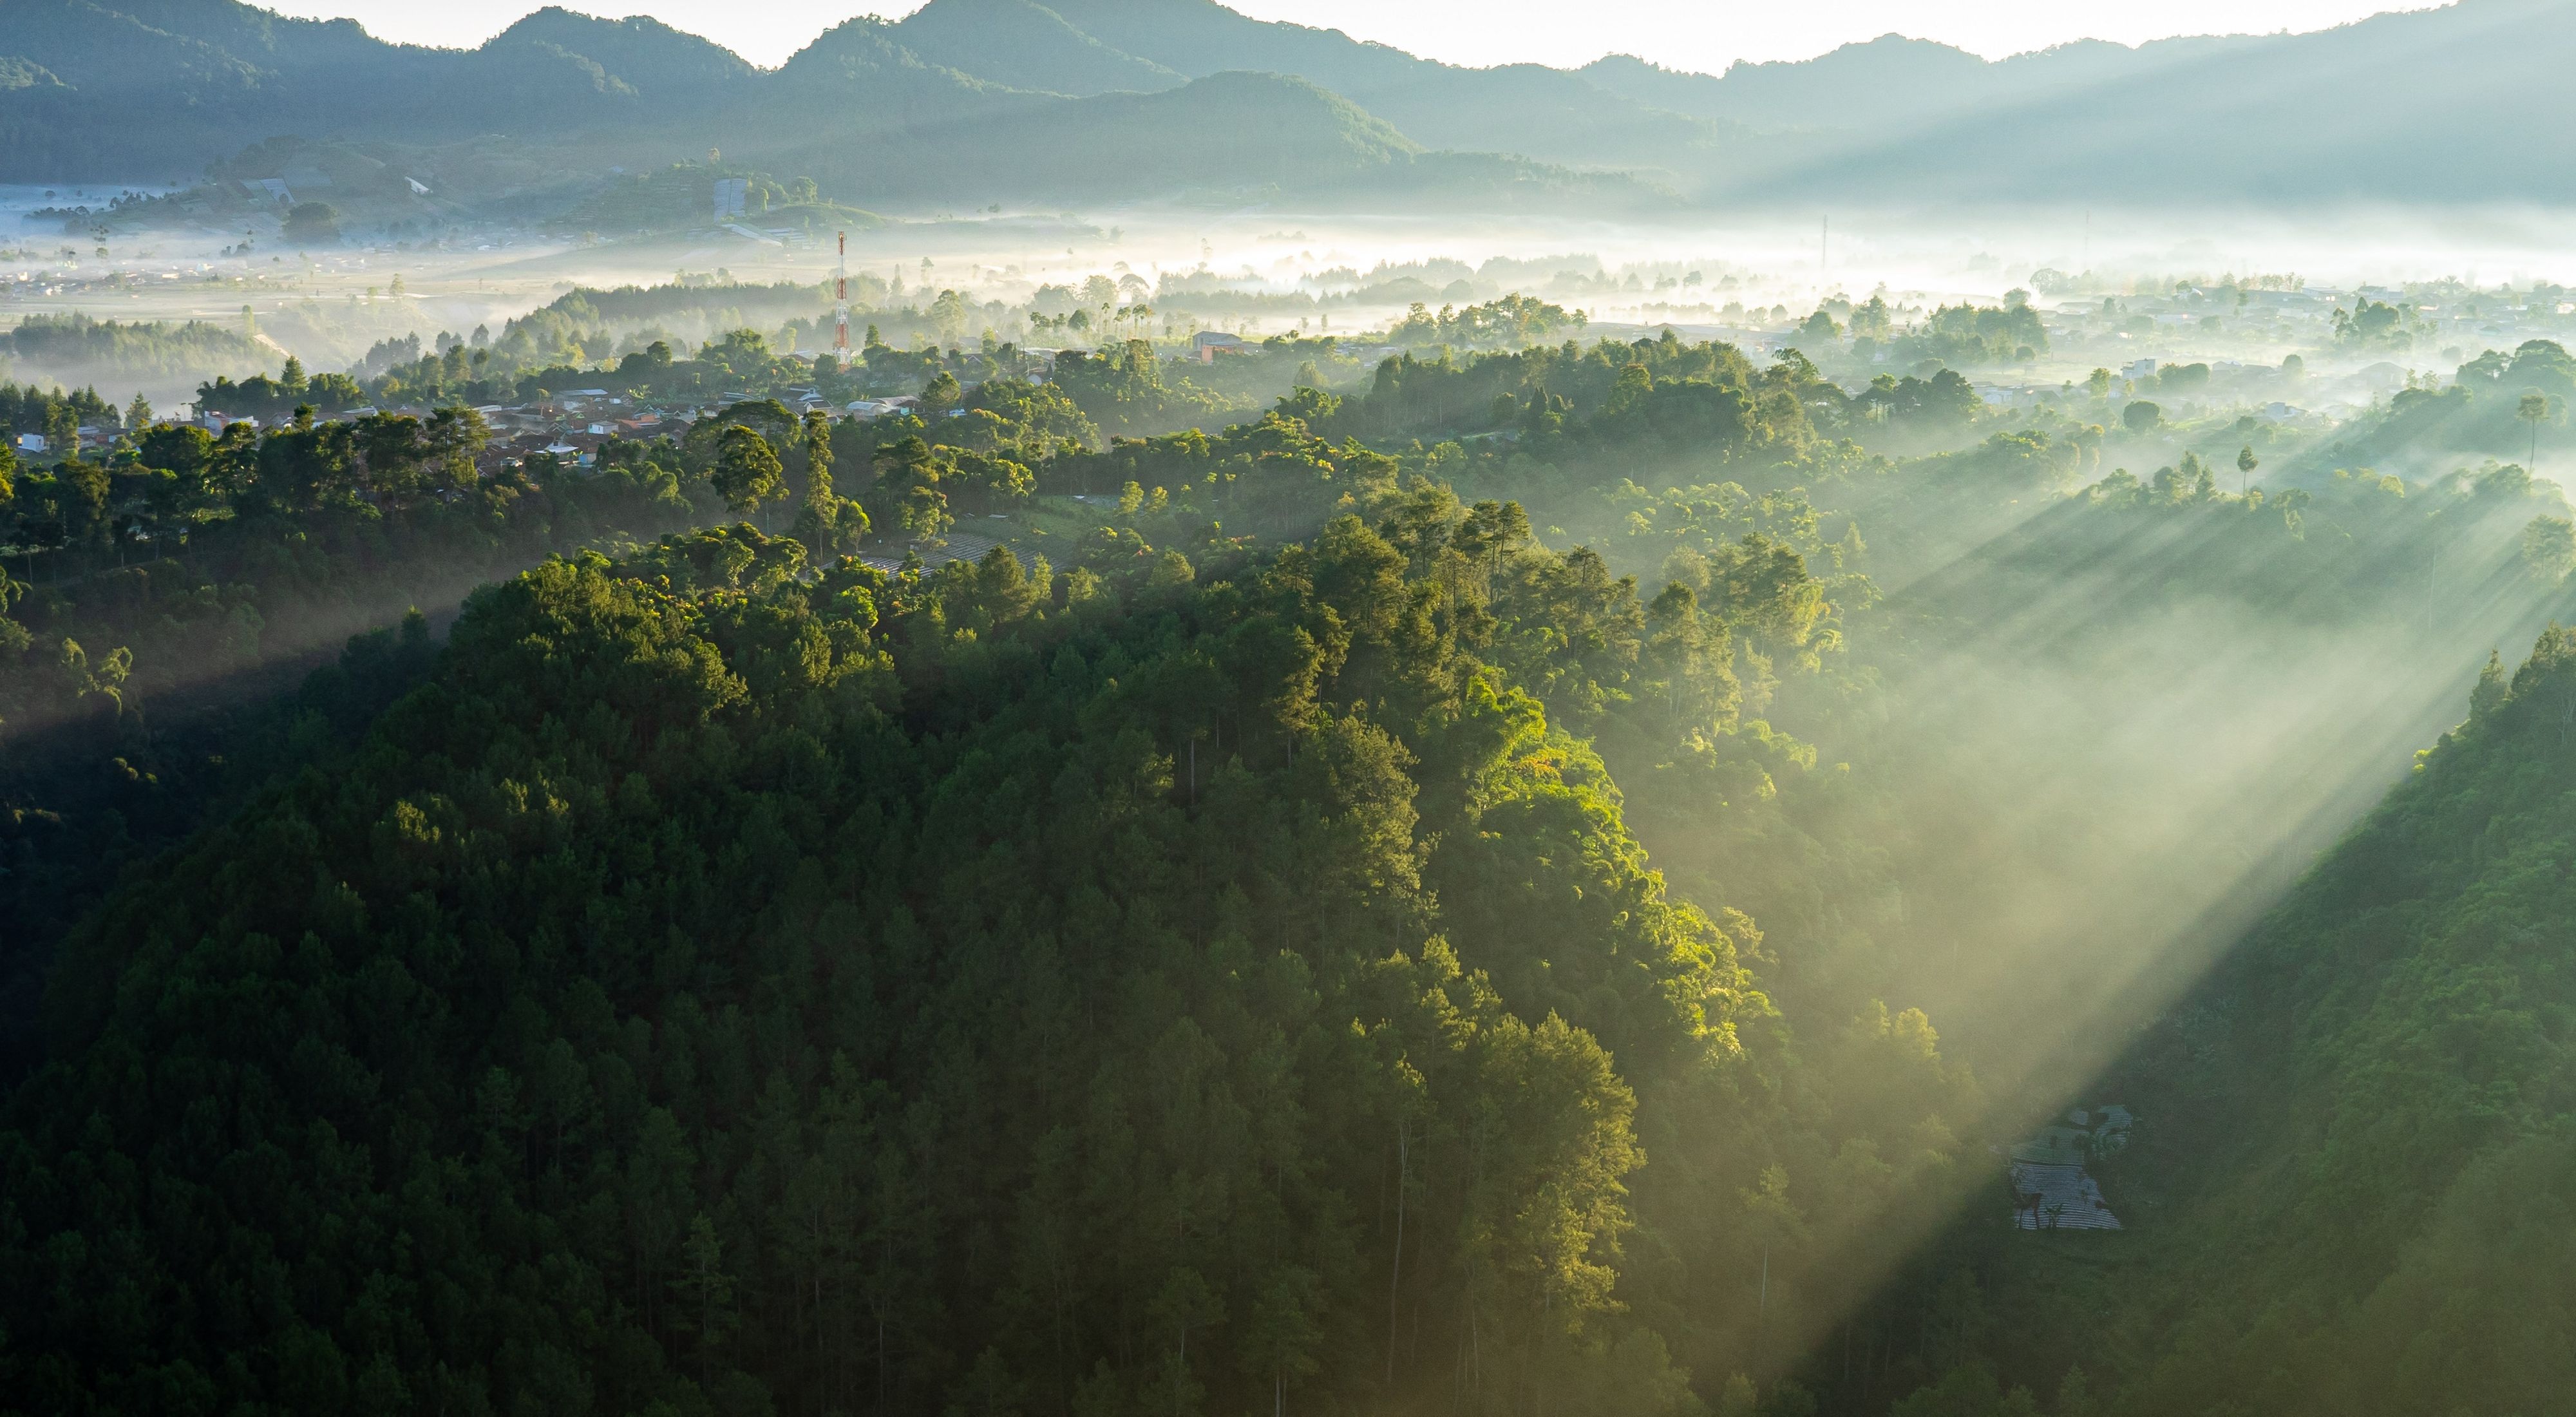 The sun breaking through the mist to give warmth to an Indonesian forest.